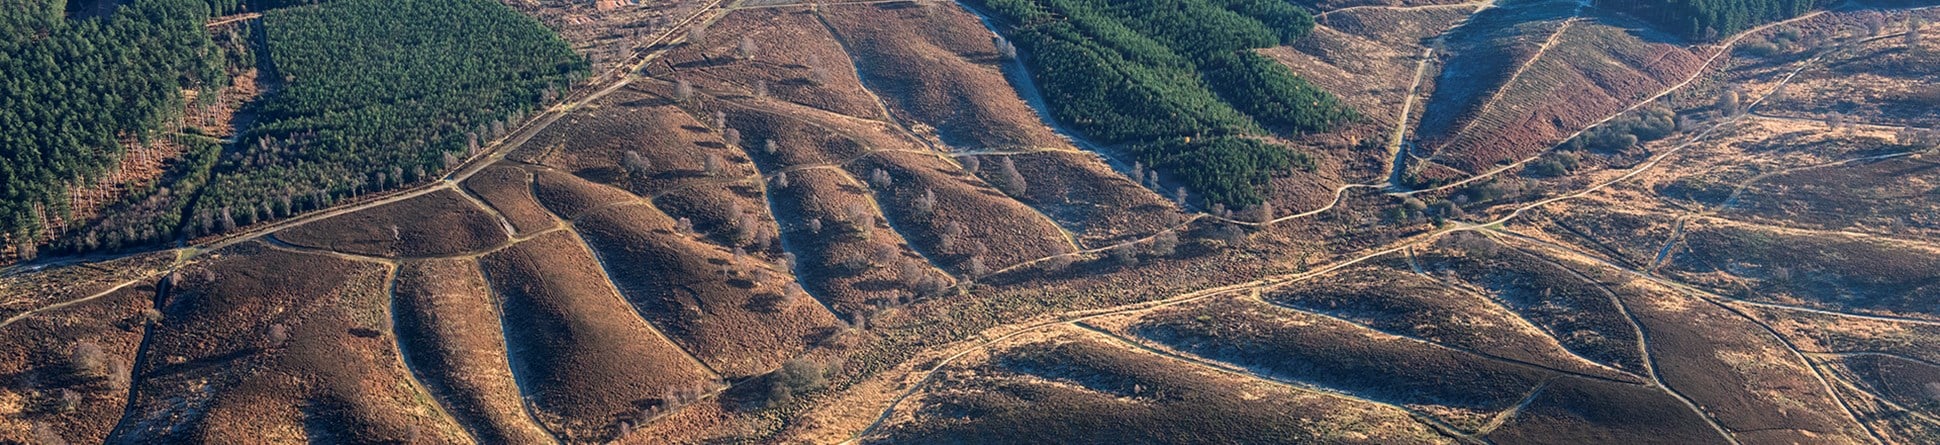 Colour aerial photo showing heathland with deeply incised valleys and some plantations